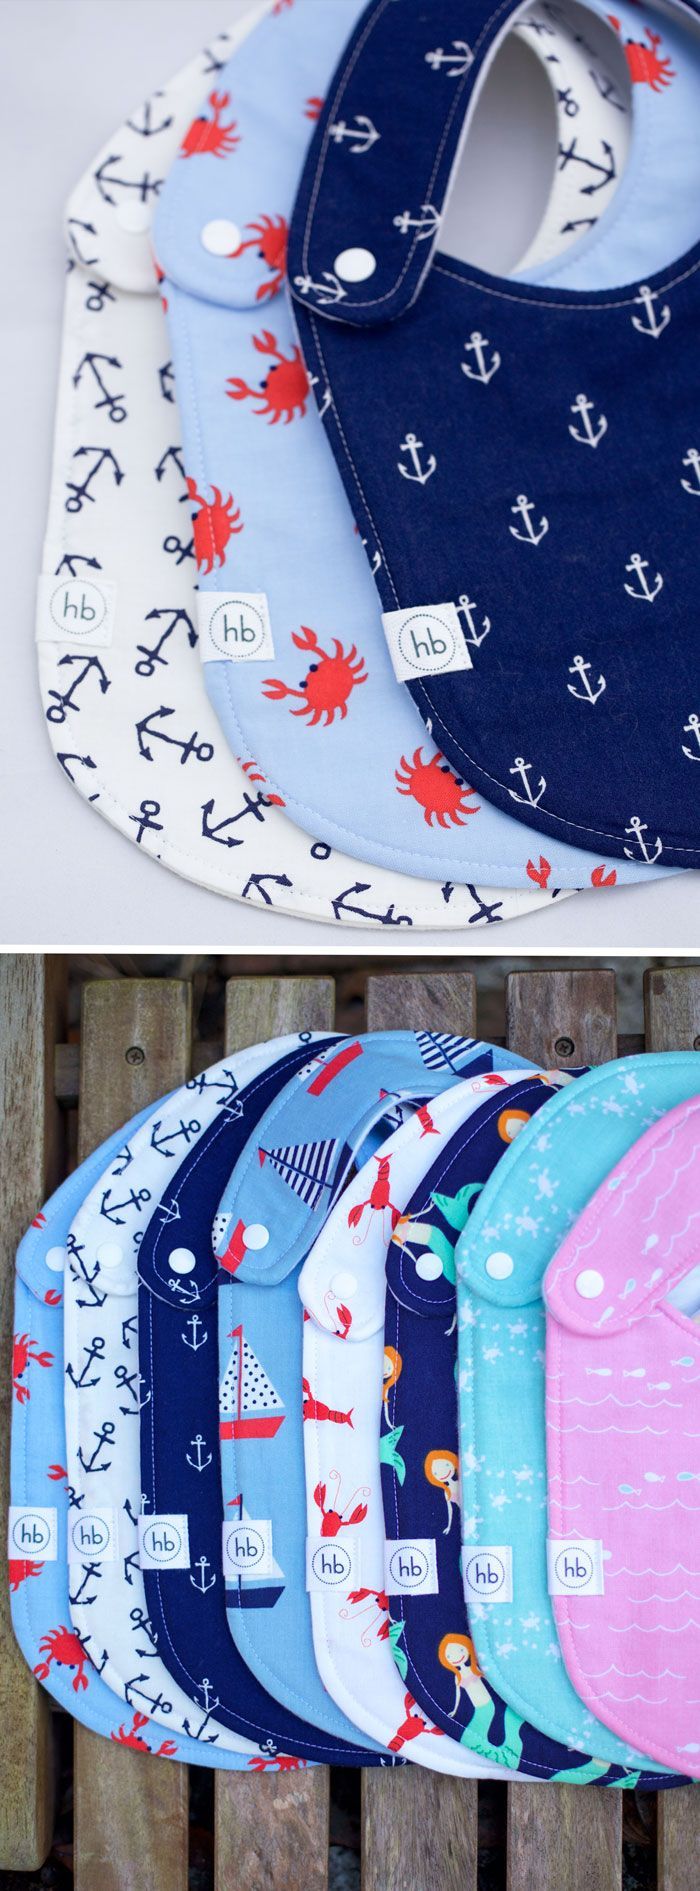 NAUTICAL COLLECTION Charlie Bibs | Hemming Birds Boutique. Durable, Modern and Fashionable for your little one! Also make great